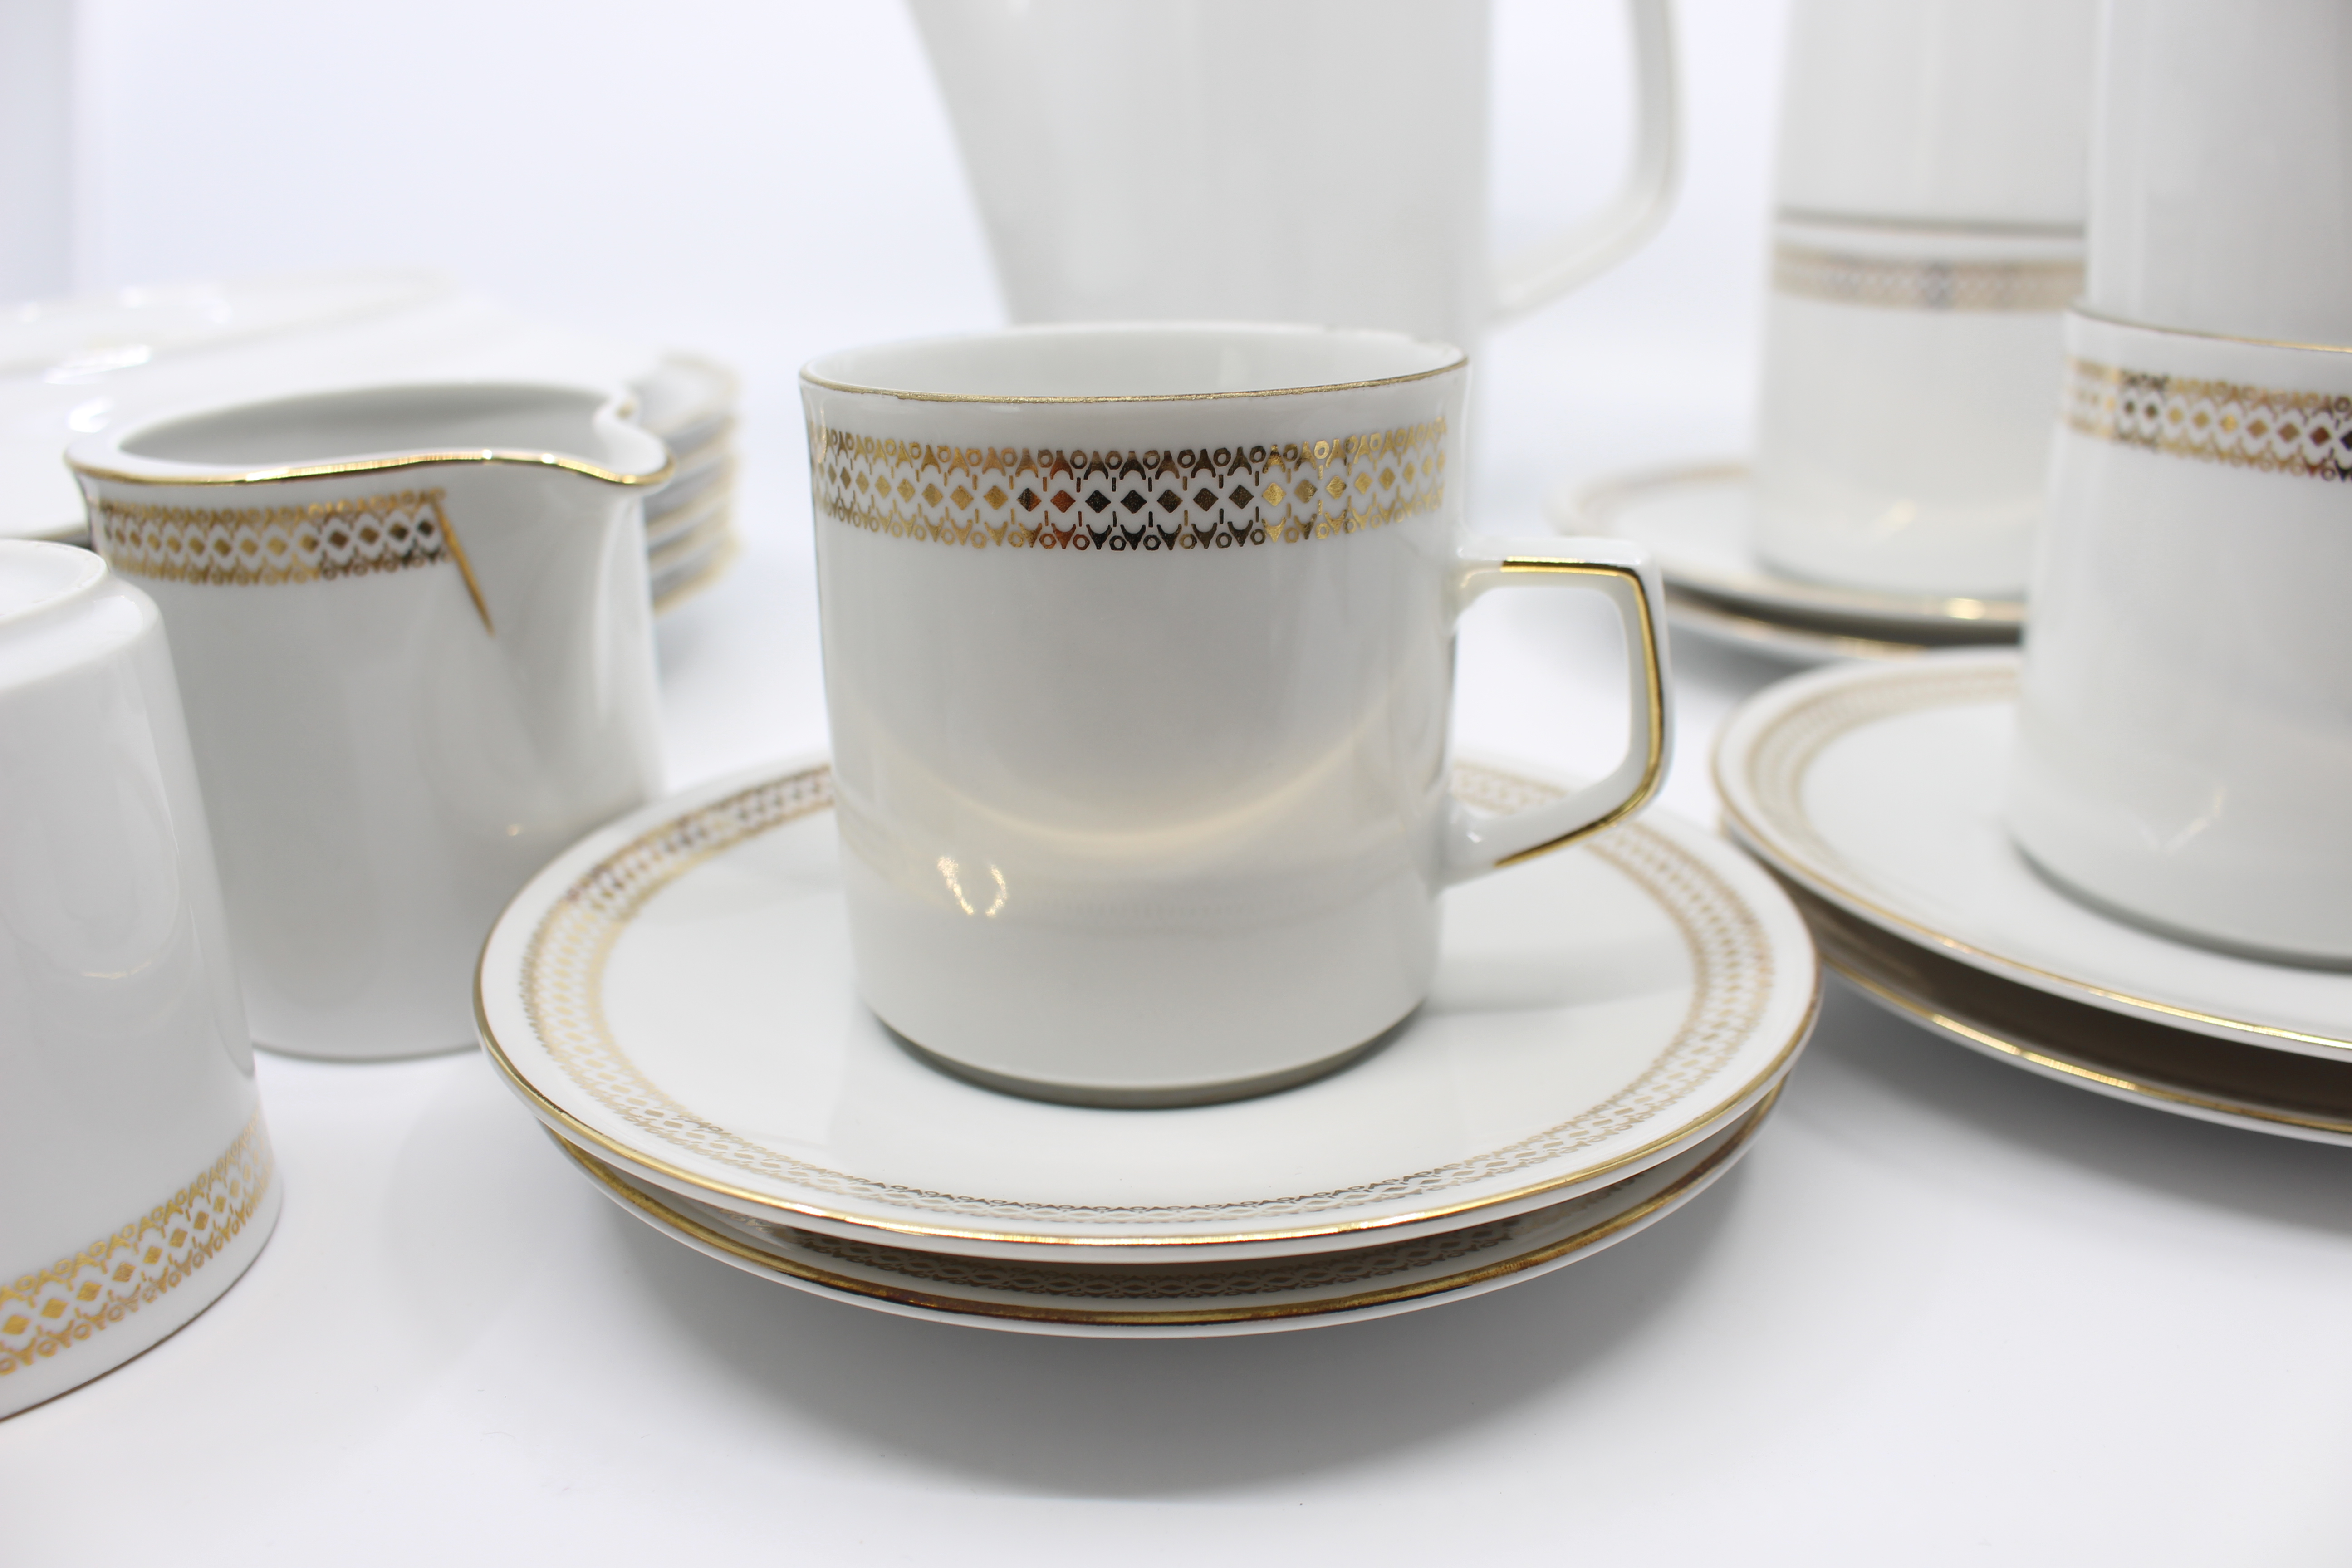 23 Piece Winterling Bavaria White & Gold Porcelain Coffee Service - Image 9 of 10